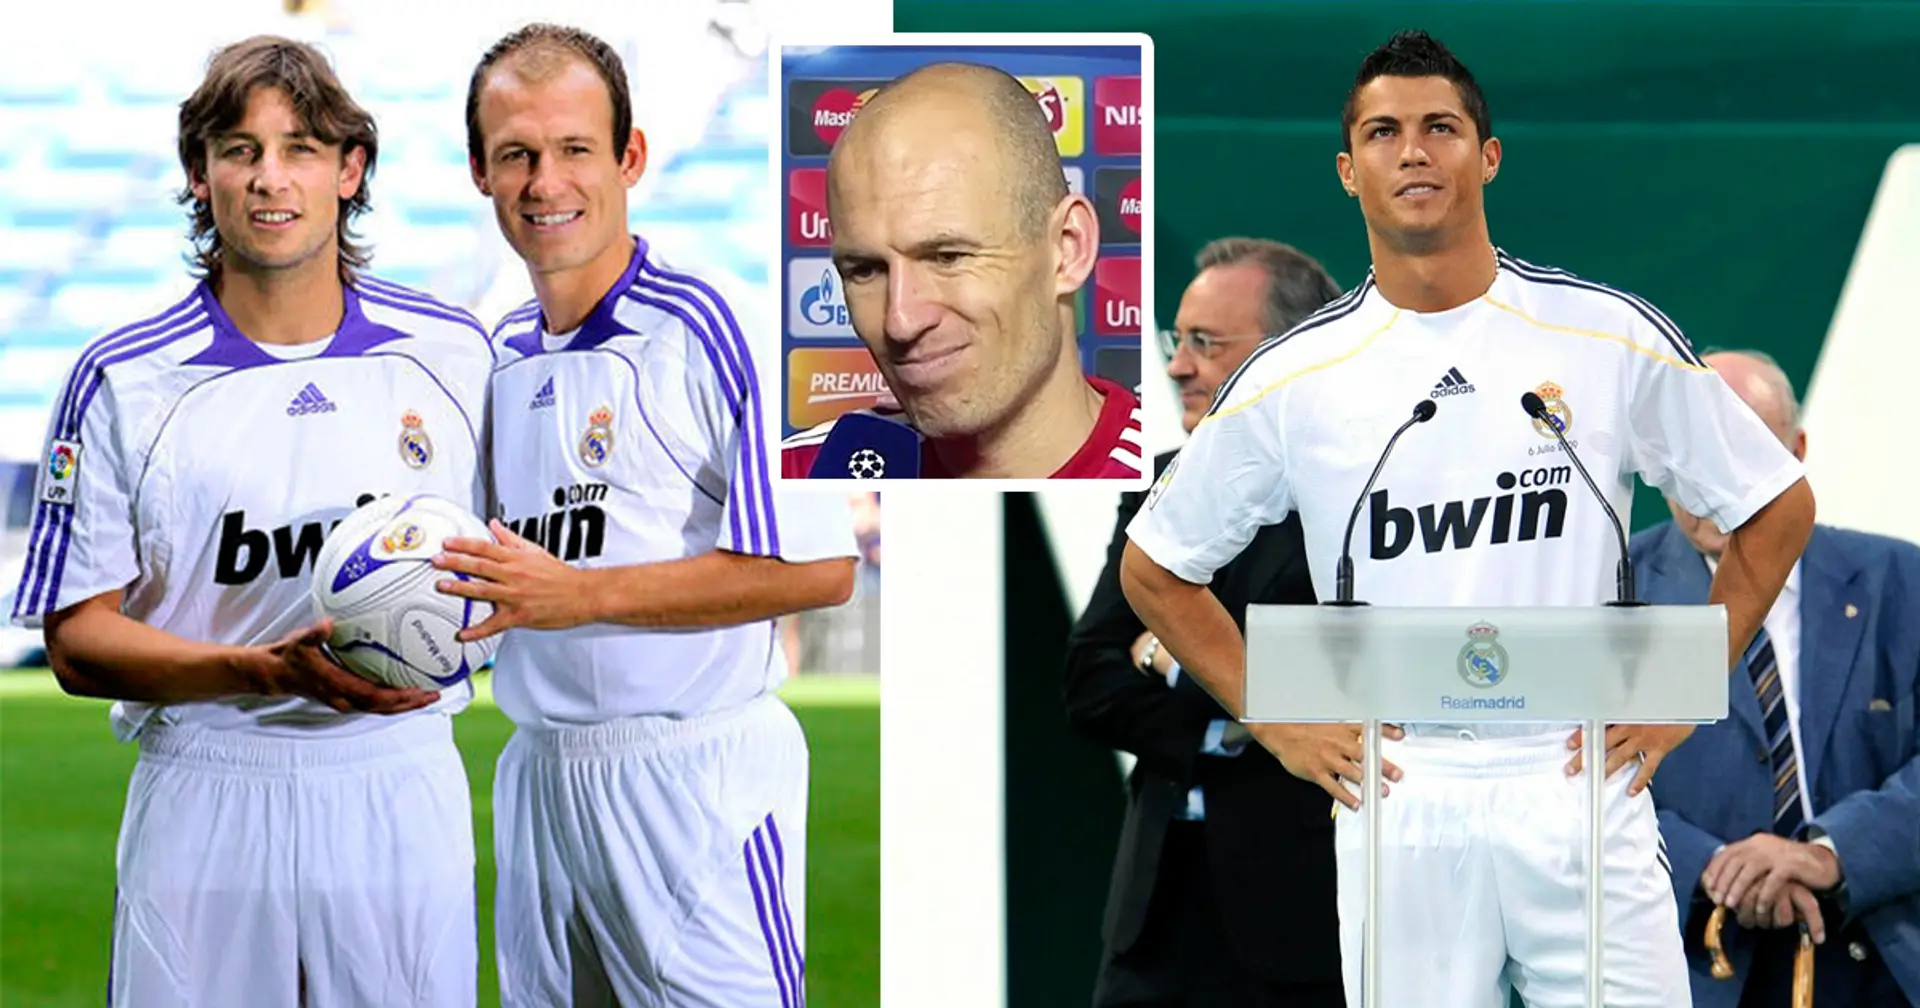 'It wasn't just Ronaldo': Robben reveals why leaving Real Madrid for Bayern was the 'best decision' for him